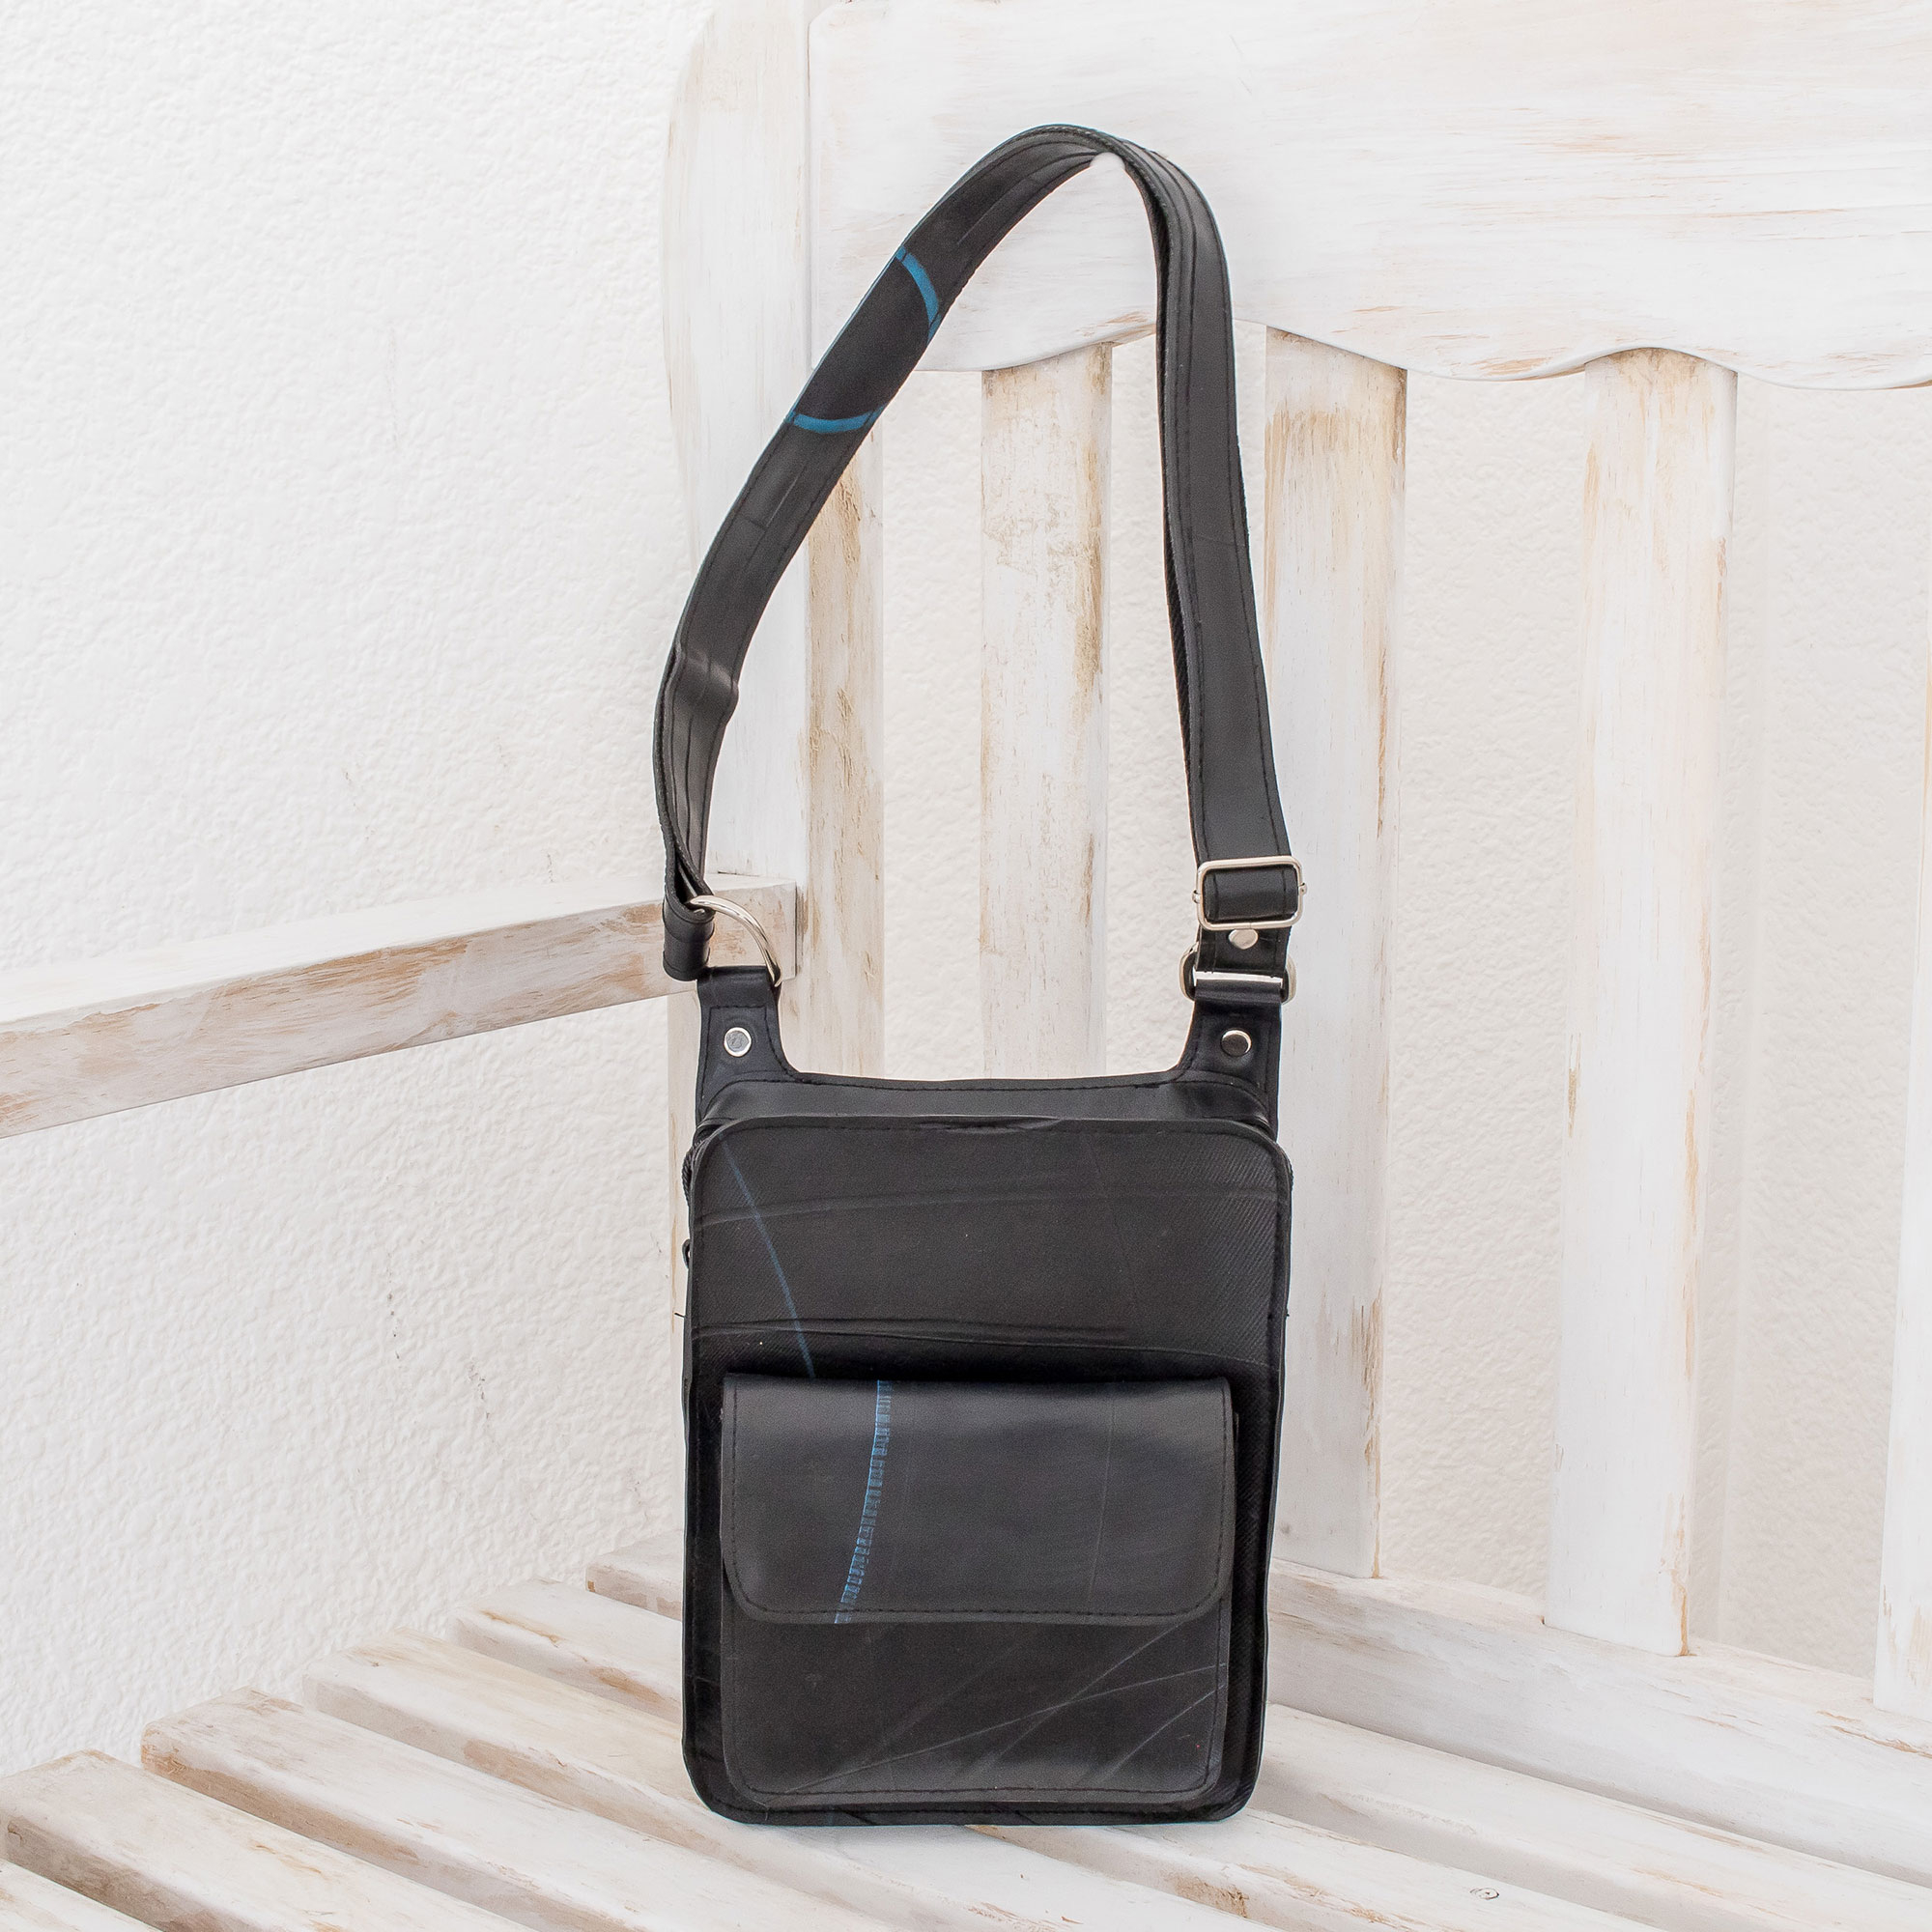 Handmade Recycled Rubber Sling from El Salvador - Eco Simplicity